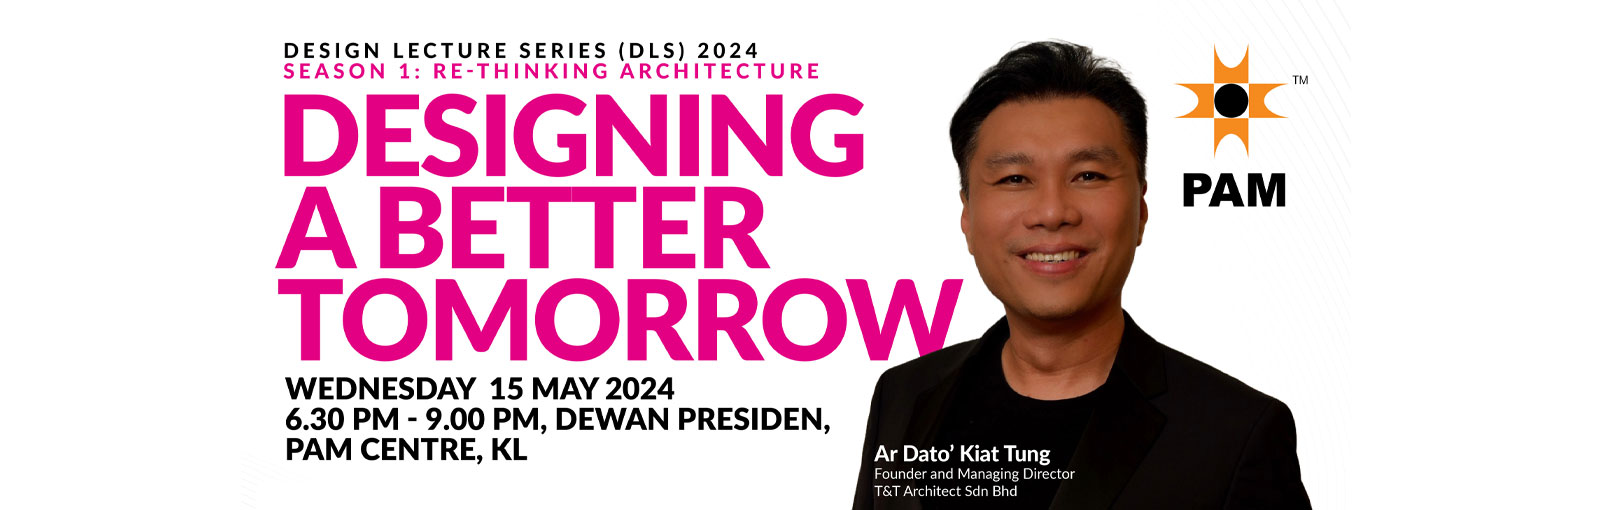 DESIGN LECTURE SERIES (DLS) 2024 : SEASON 1 RE-THINKING ARCHITECTURE : DESIGNING A BETTER TOMORROW